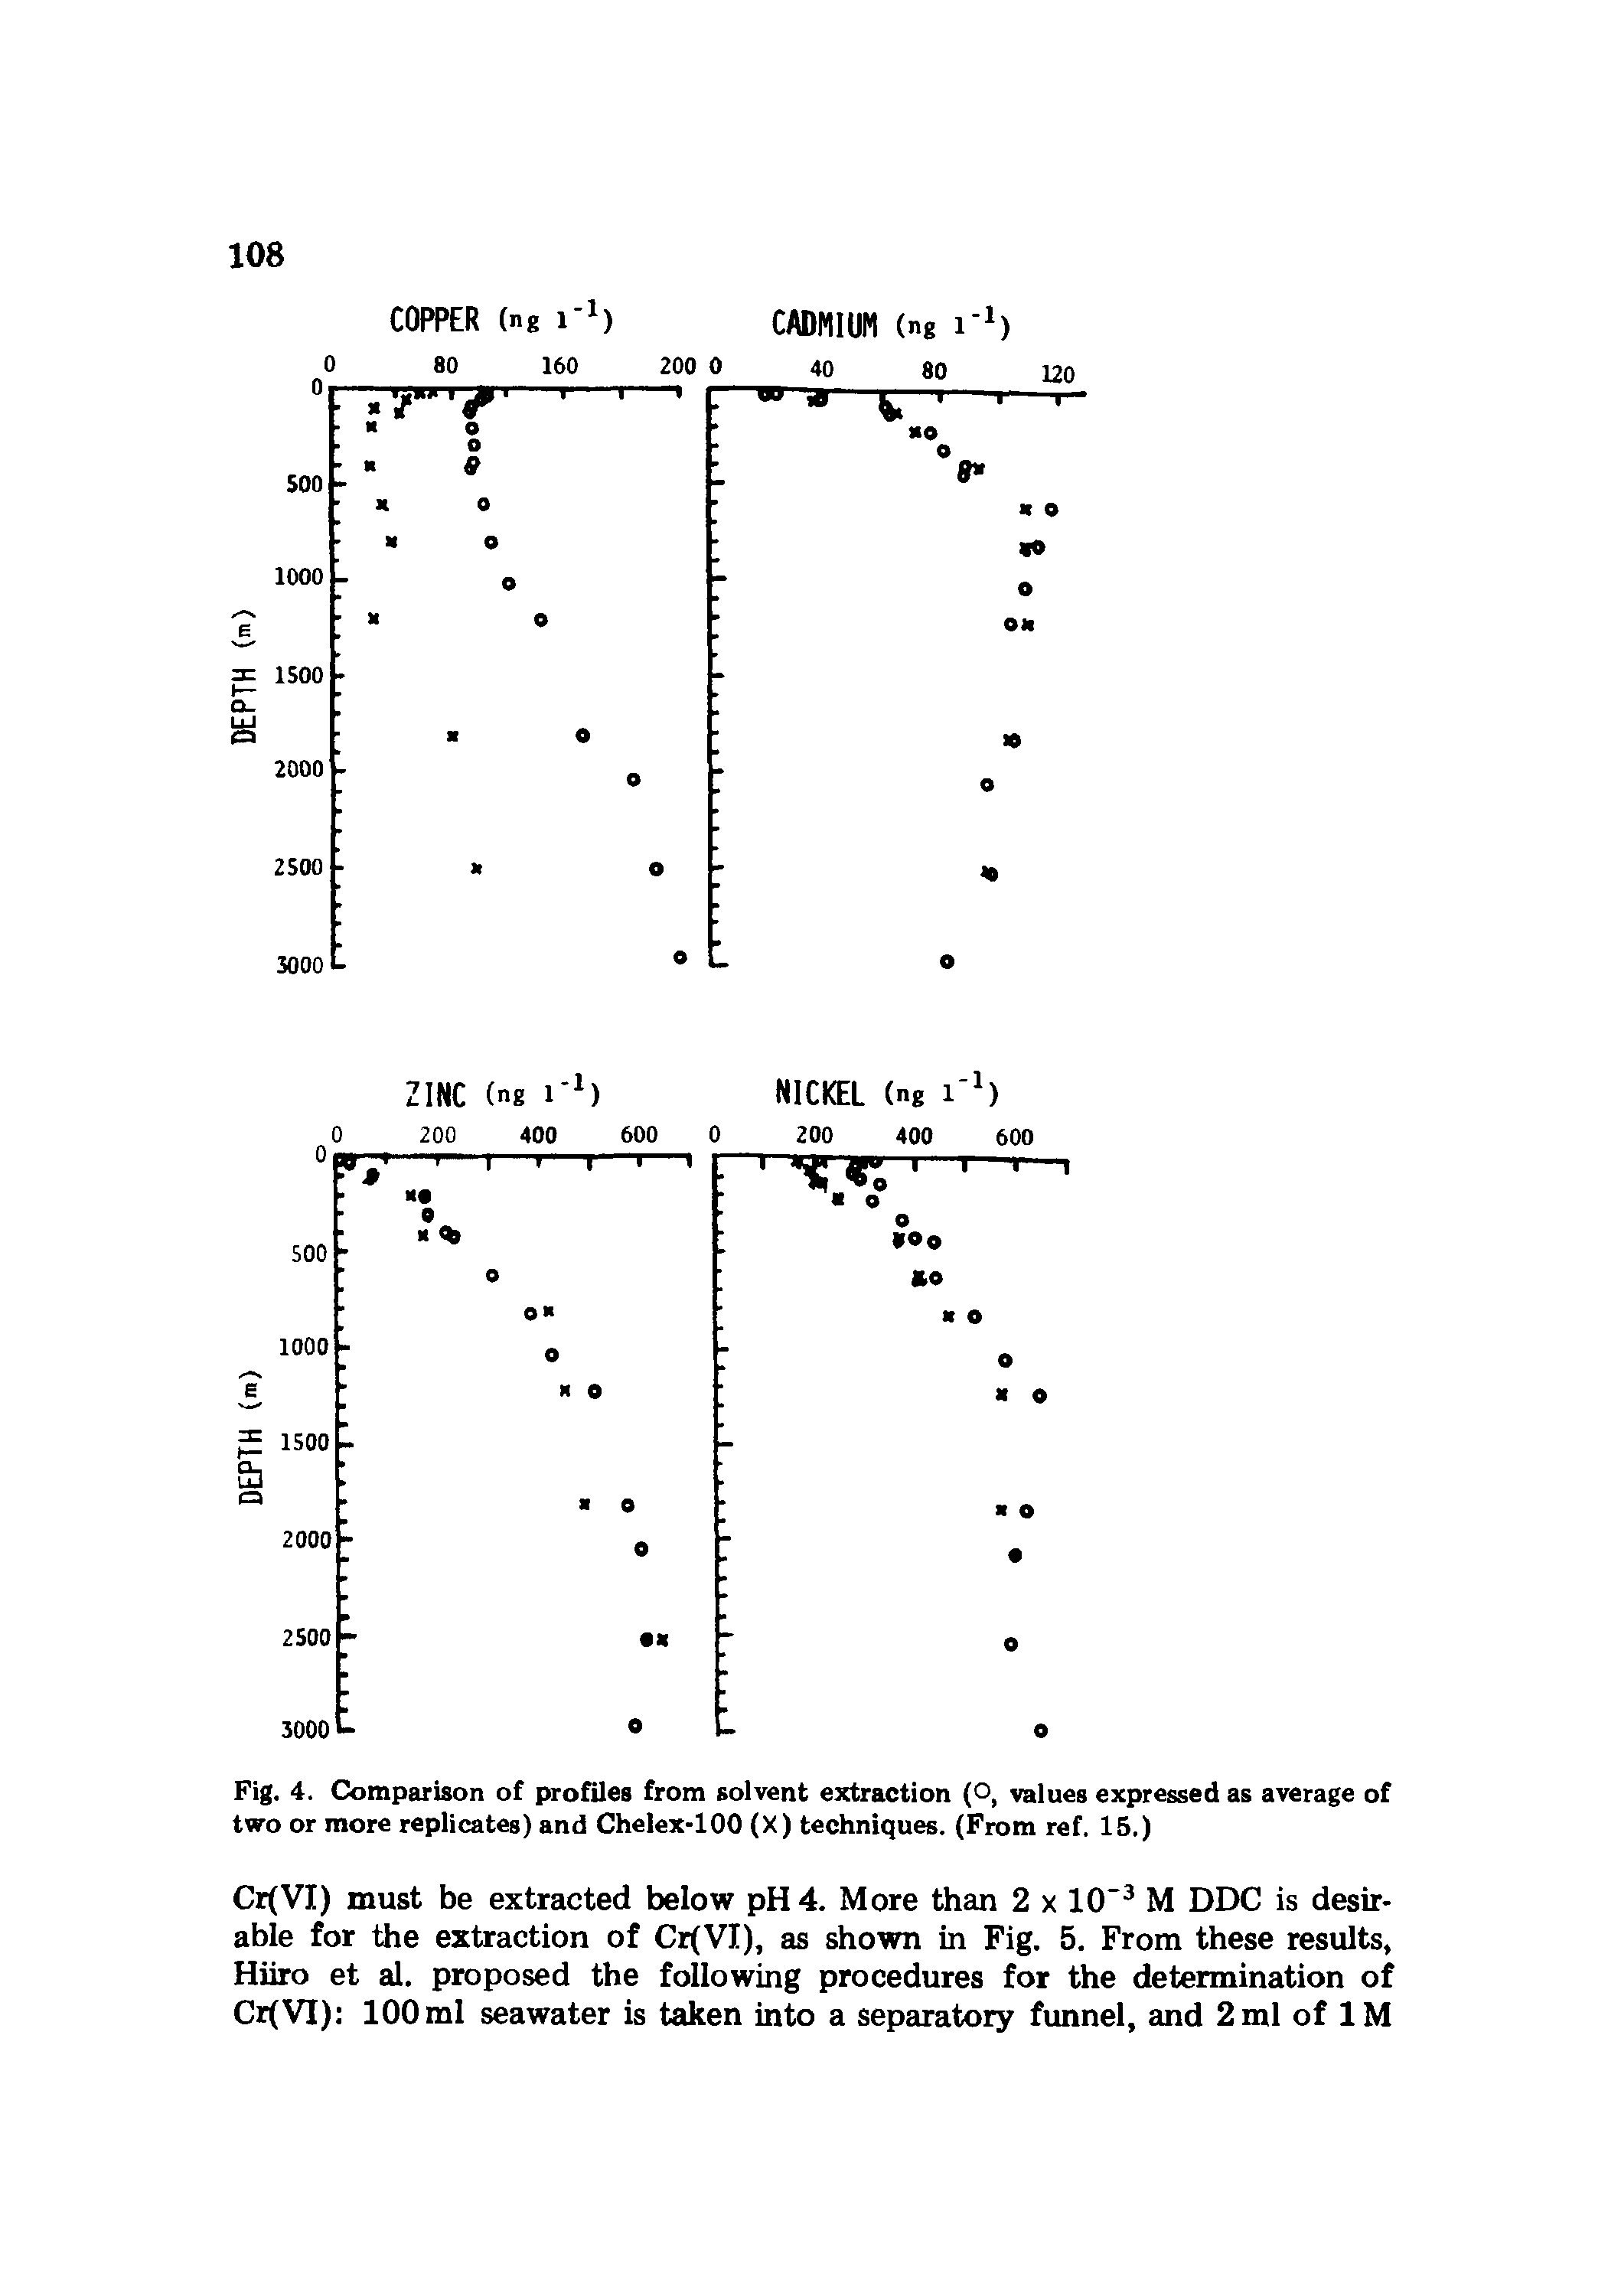 Fig. 4. Comparison of profiles from solvent extraction (O, values expressed as average of two or more replicates) and Chelex-100 (X) techniques. (From ref. 15.)...